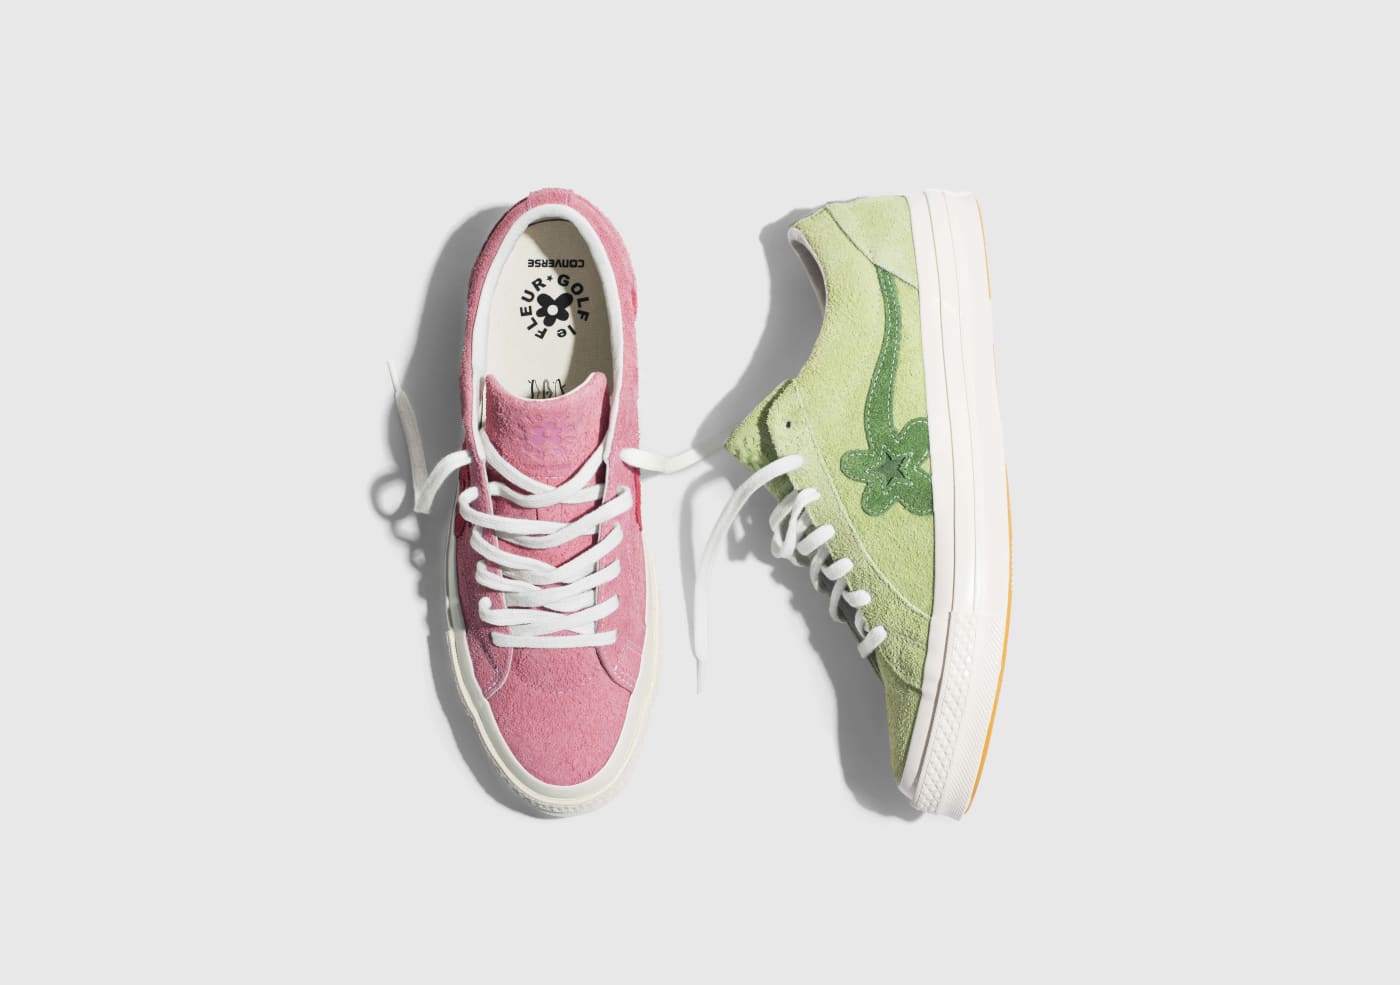 Tyler, the Creator Offers a Pastel Take on 2018 the Latest Golf Le Fleur Converse Collection | UK